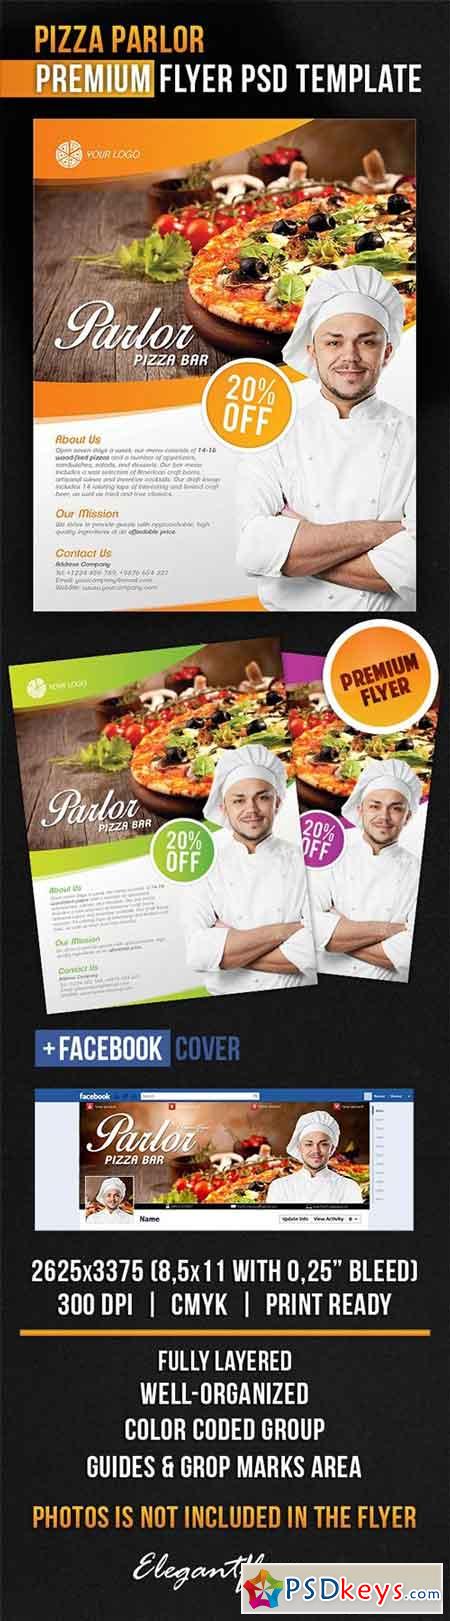 Pizza Parlor Flyer PSD Template + Facebook Cover